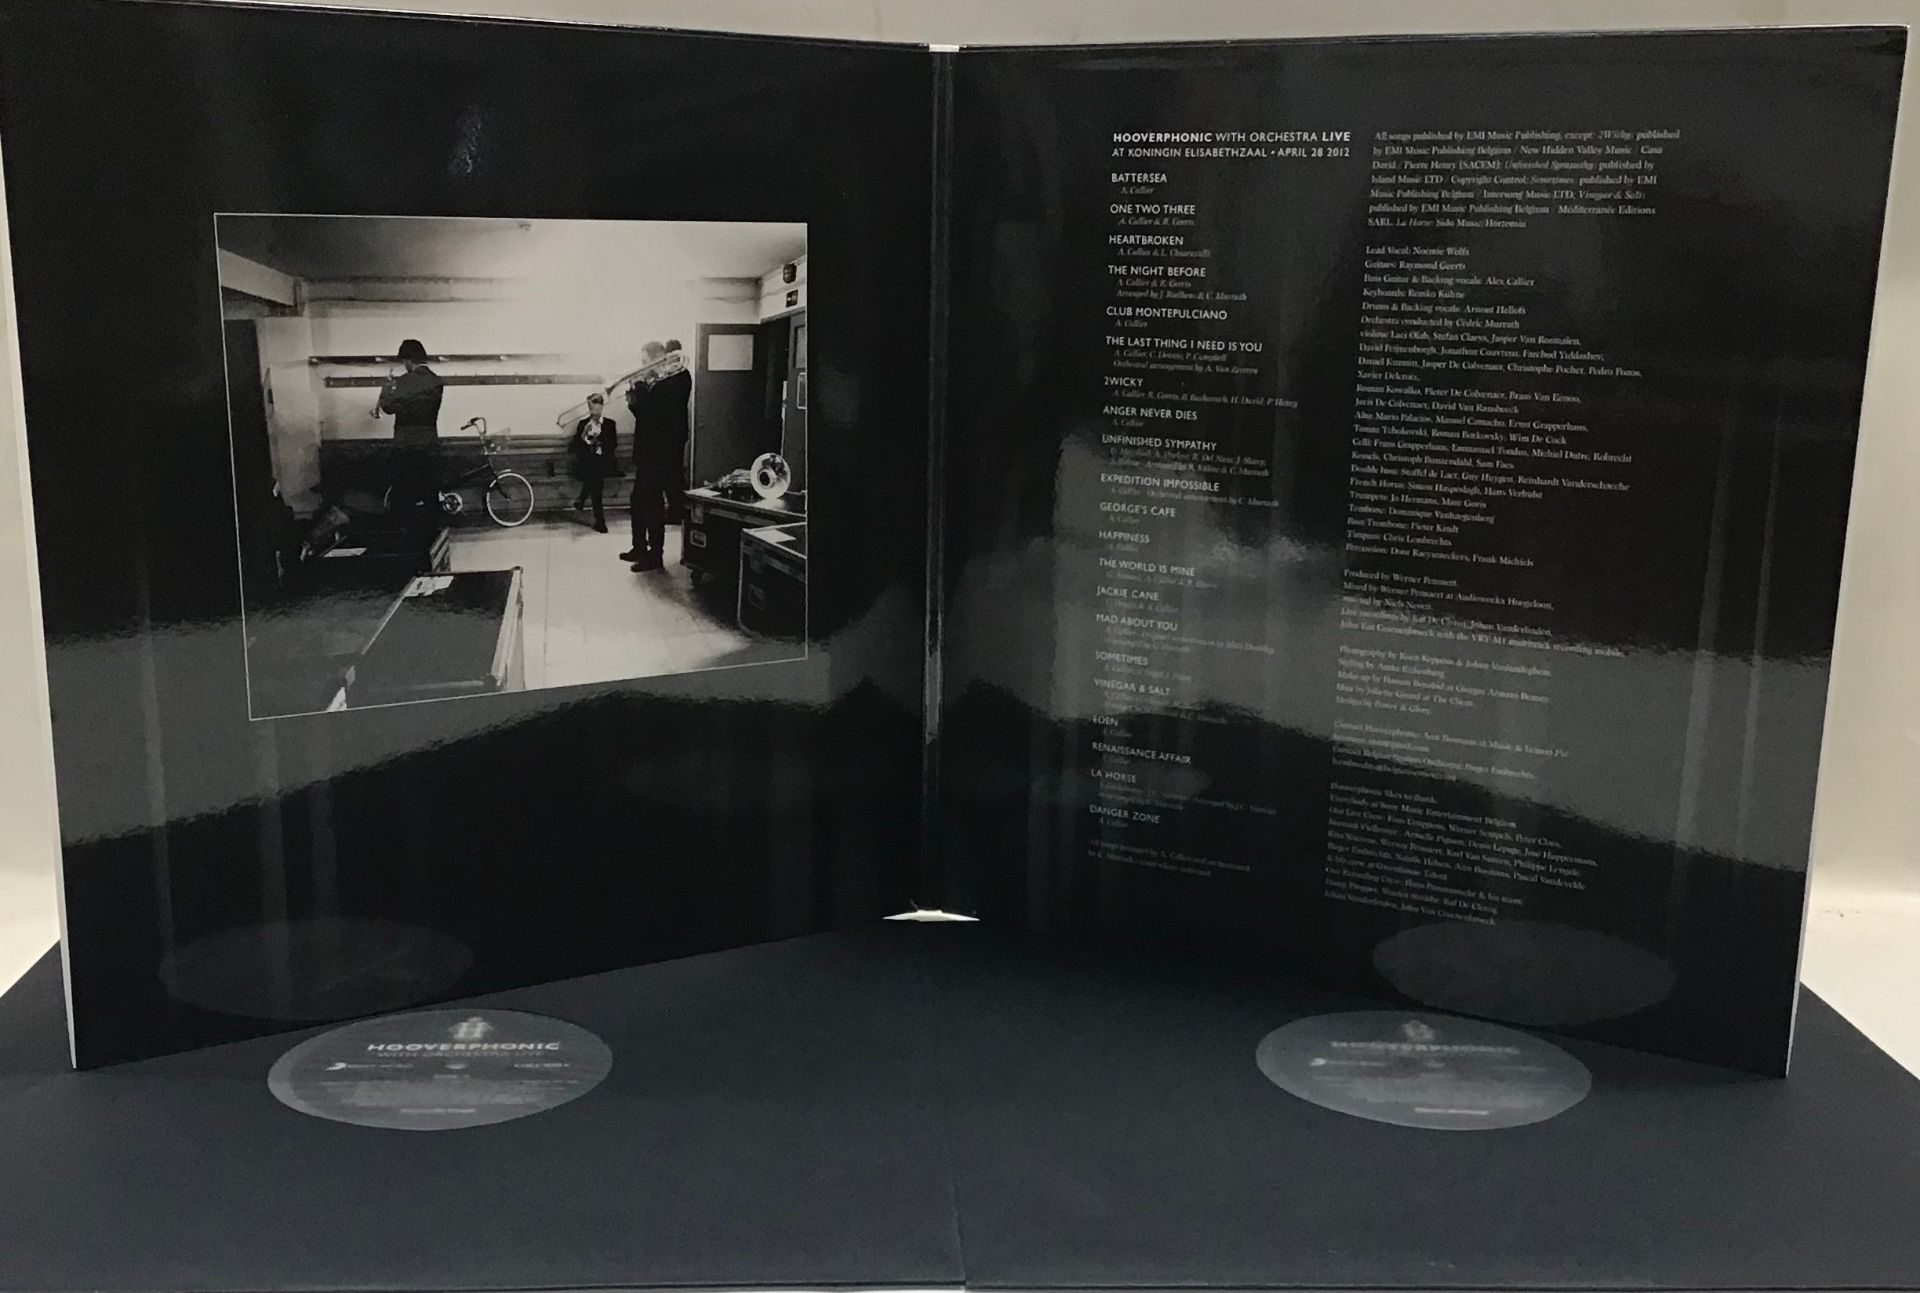 HOOVERPHONIC: WITH ORCHESTRA LIVE VINYL DOUBLE ALBUM. This is a limited press numbered 673/1000 - Image 3 of 3